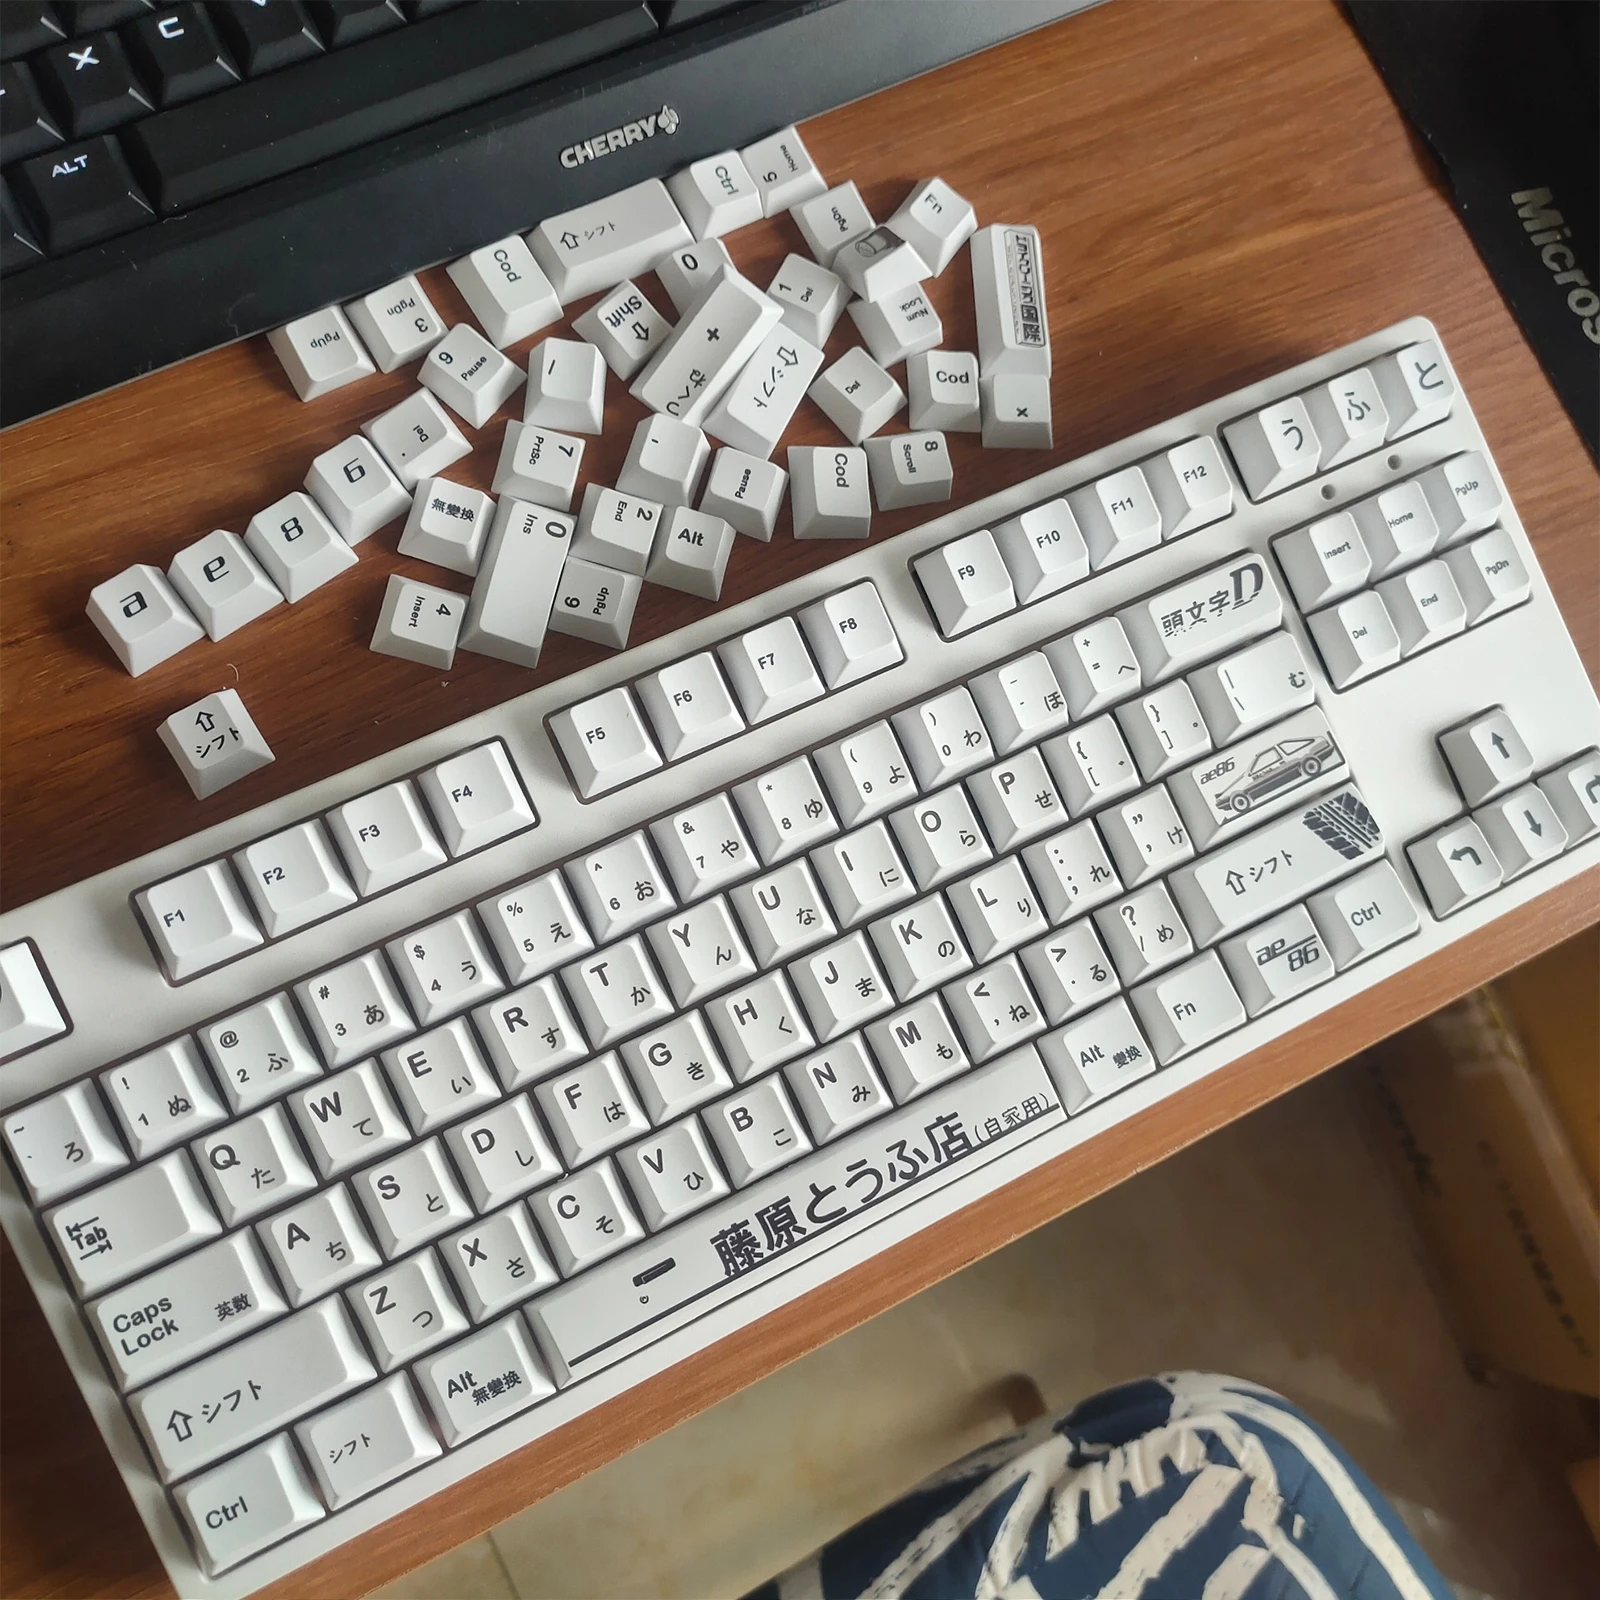 Keycap Set for Mechanical Keyboard,Initial D Theme with Hiragana and AE86 Elements,126 Keys,PBT,Cherry Profile,Dye Sublimation